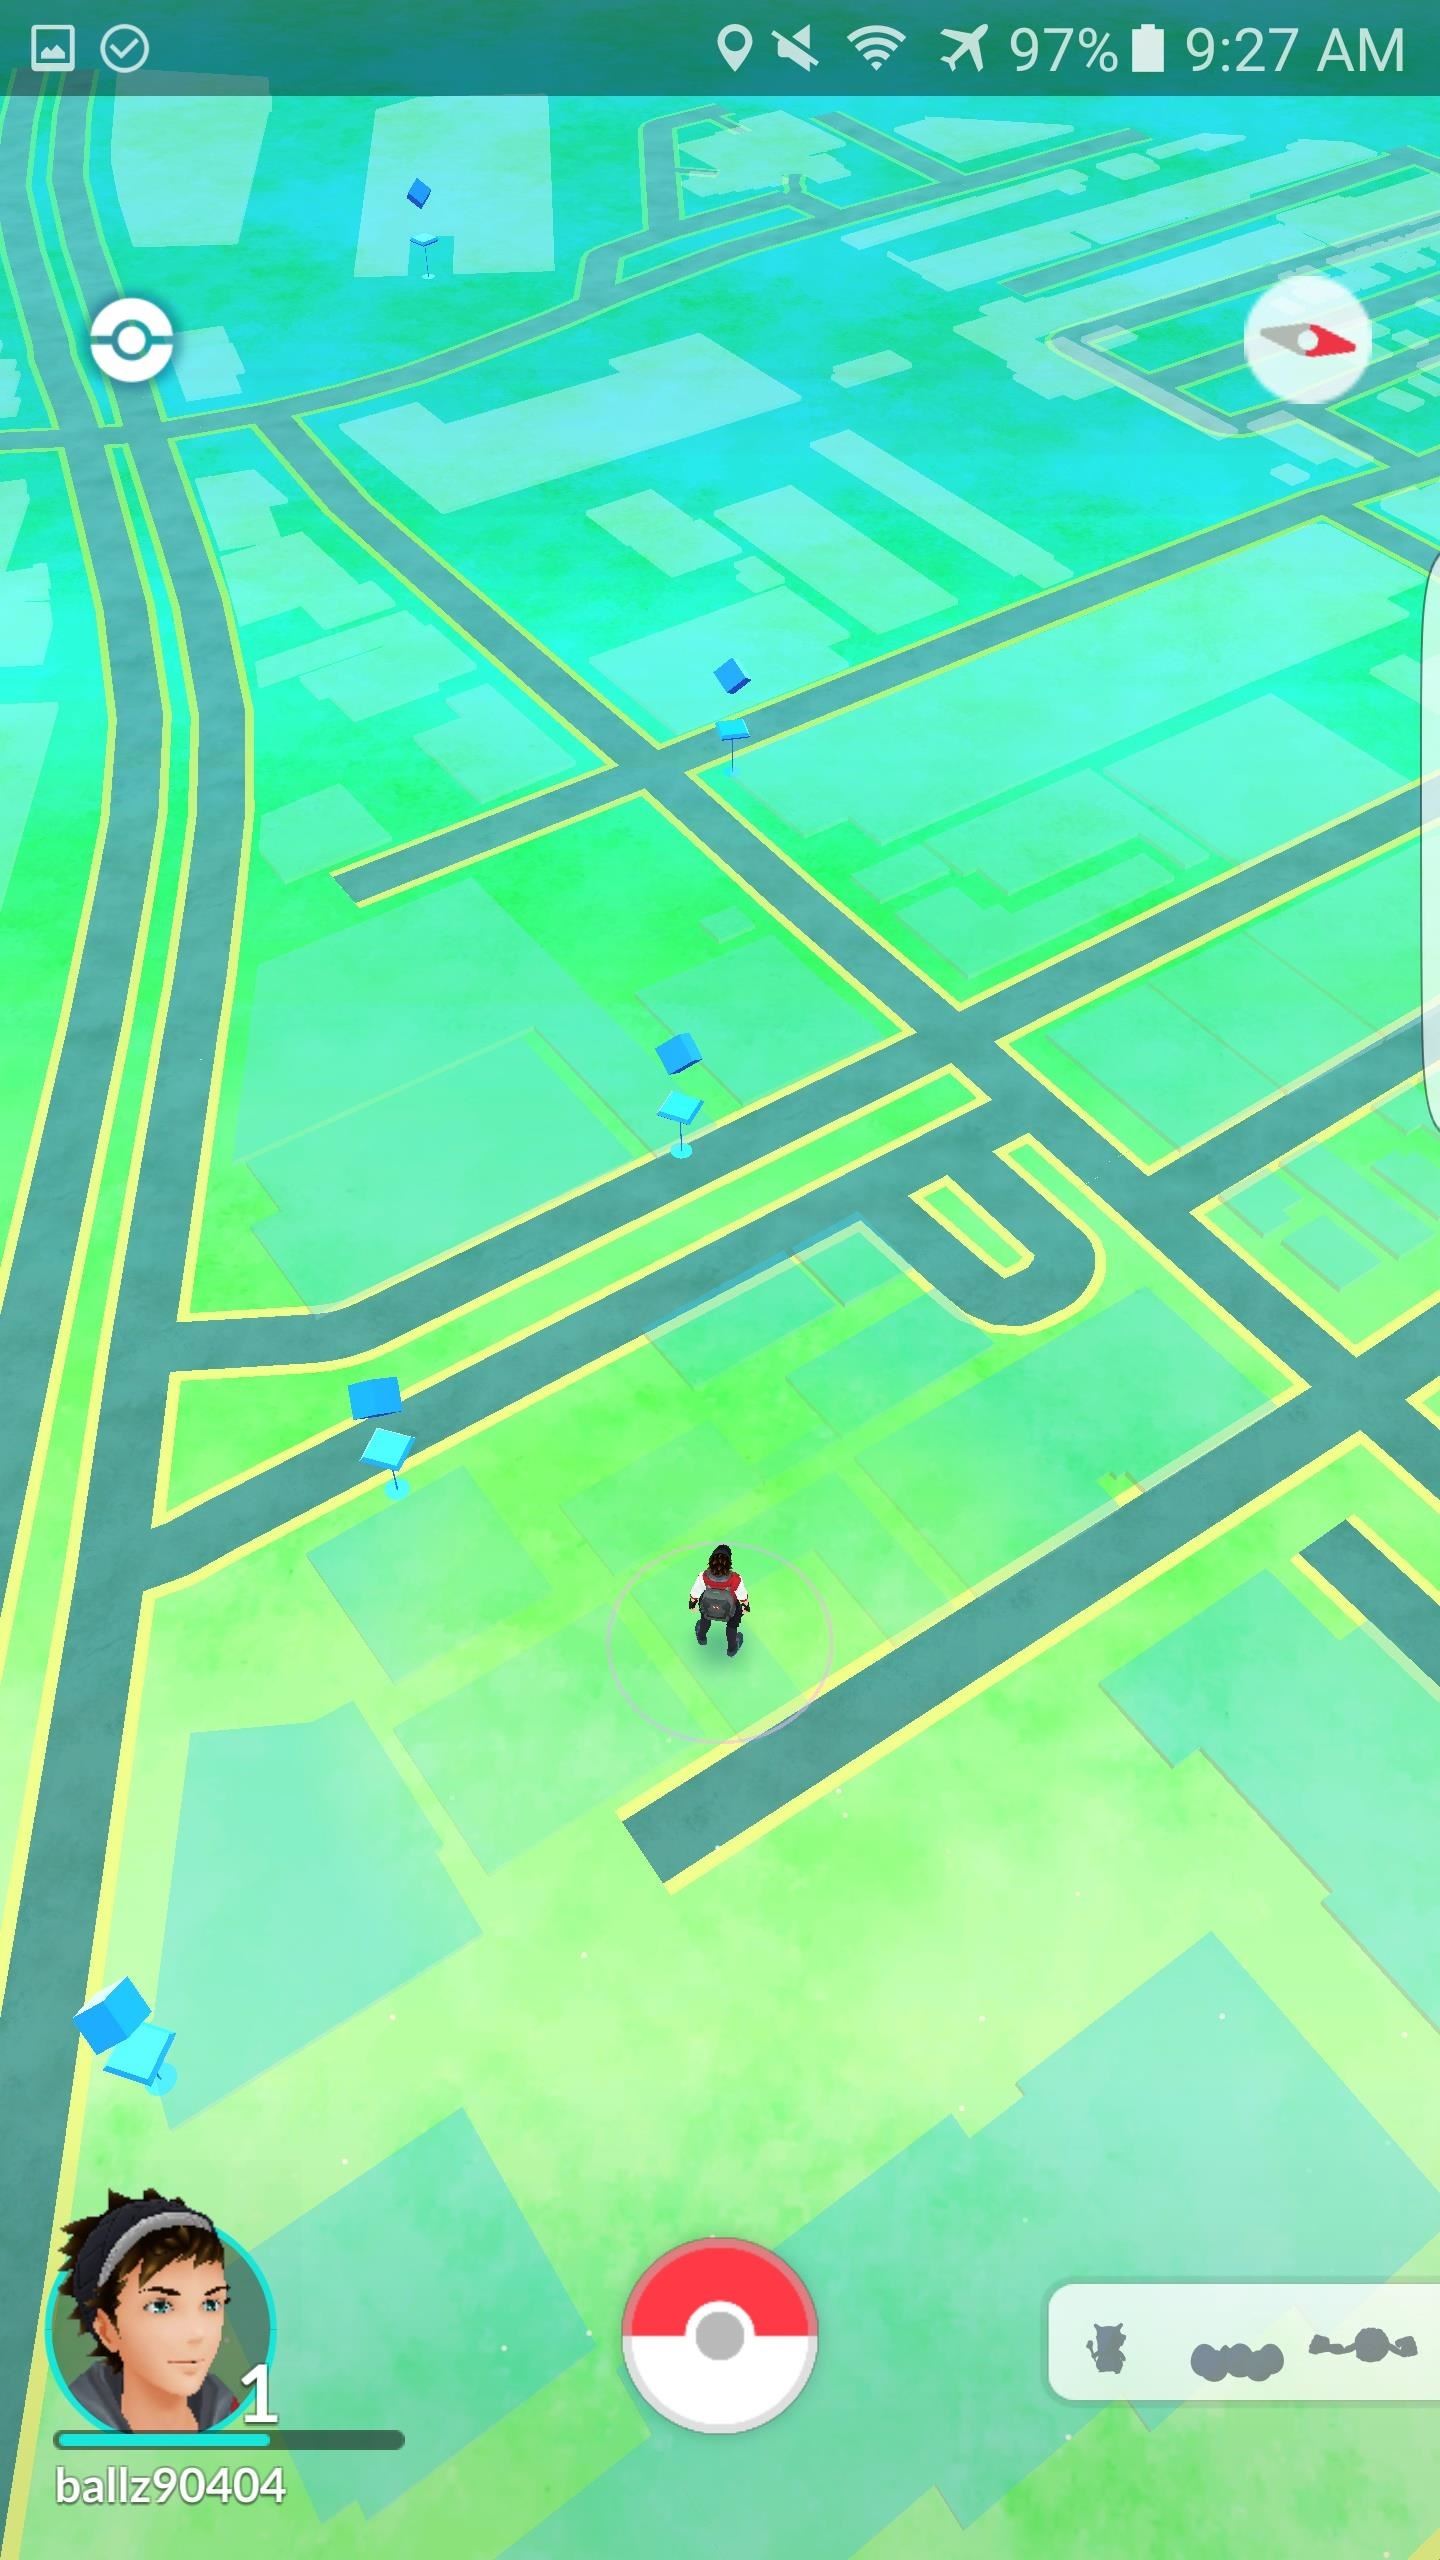 How to Fake GPS Location & Movement to Cheat at Pokémon GO Android « Mobile AR News ::